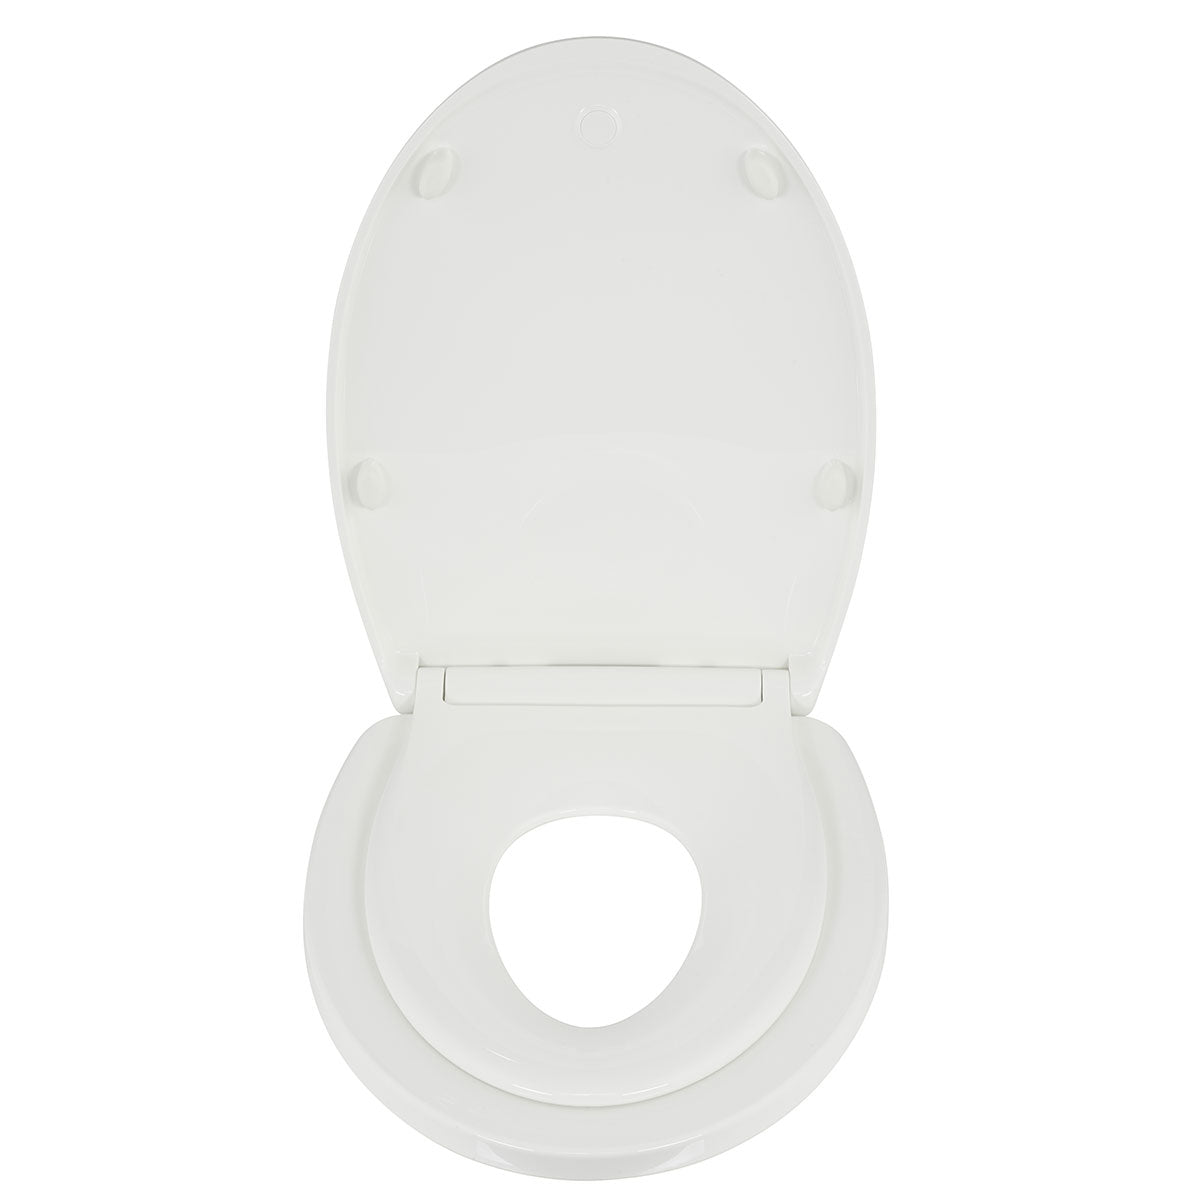 Elongated Kingsport Family Toilet Seat with Built-In Child Seat